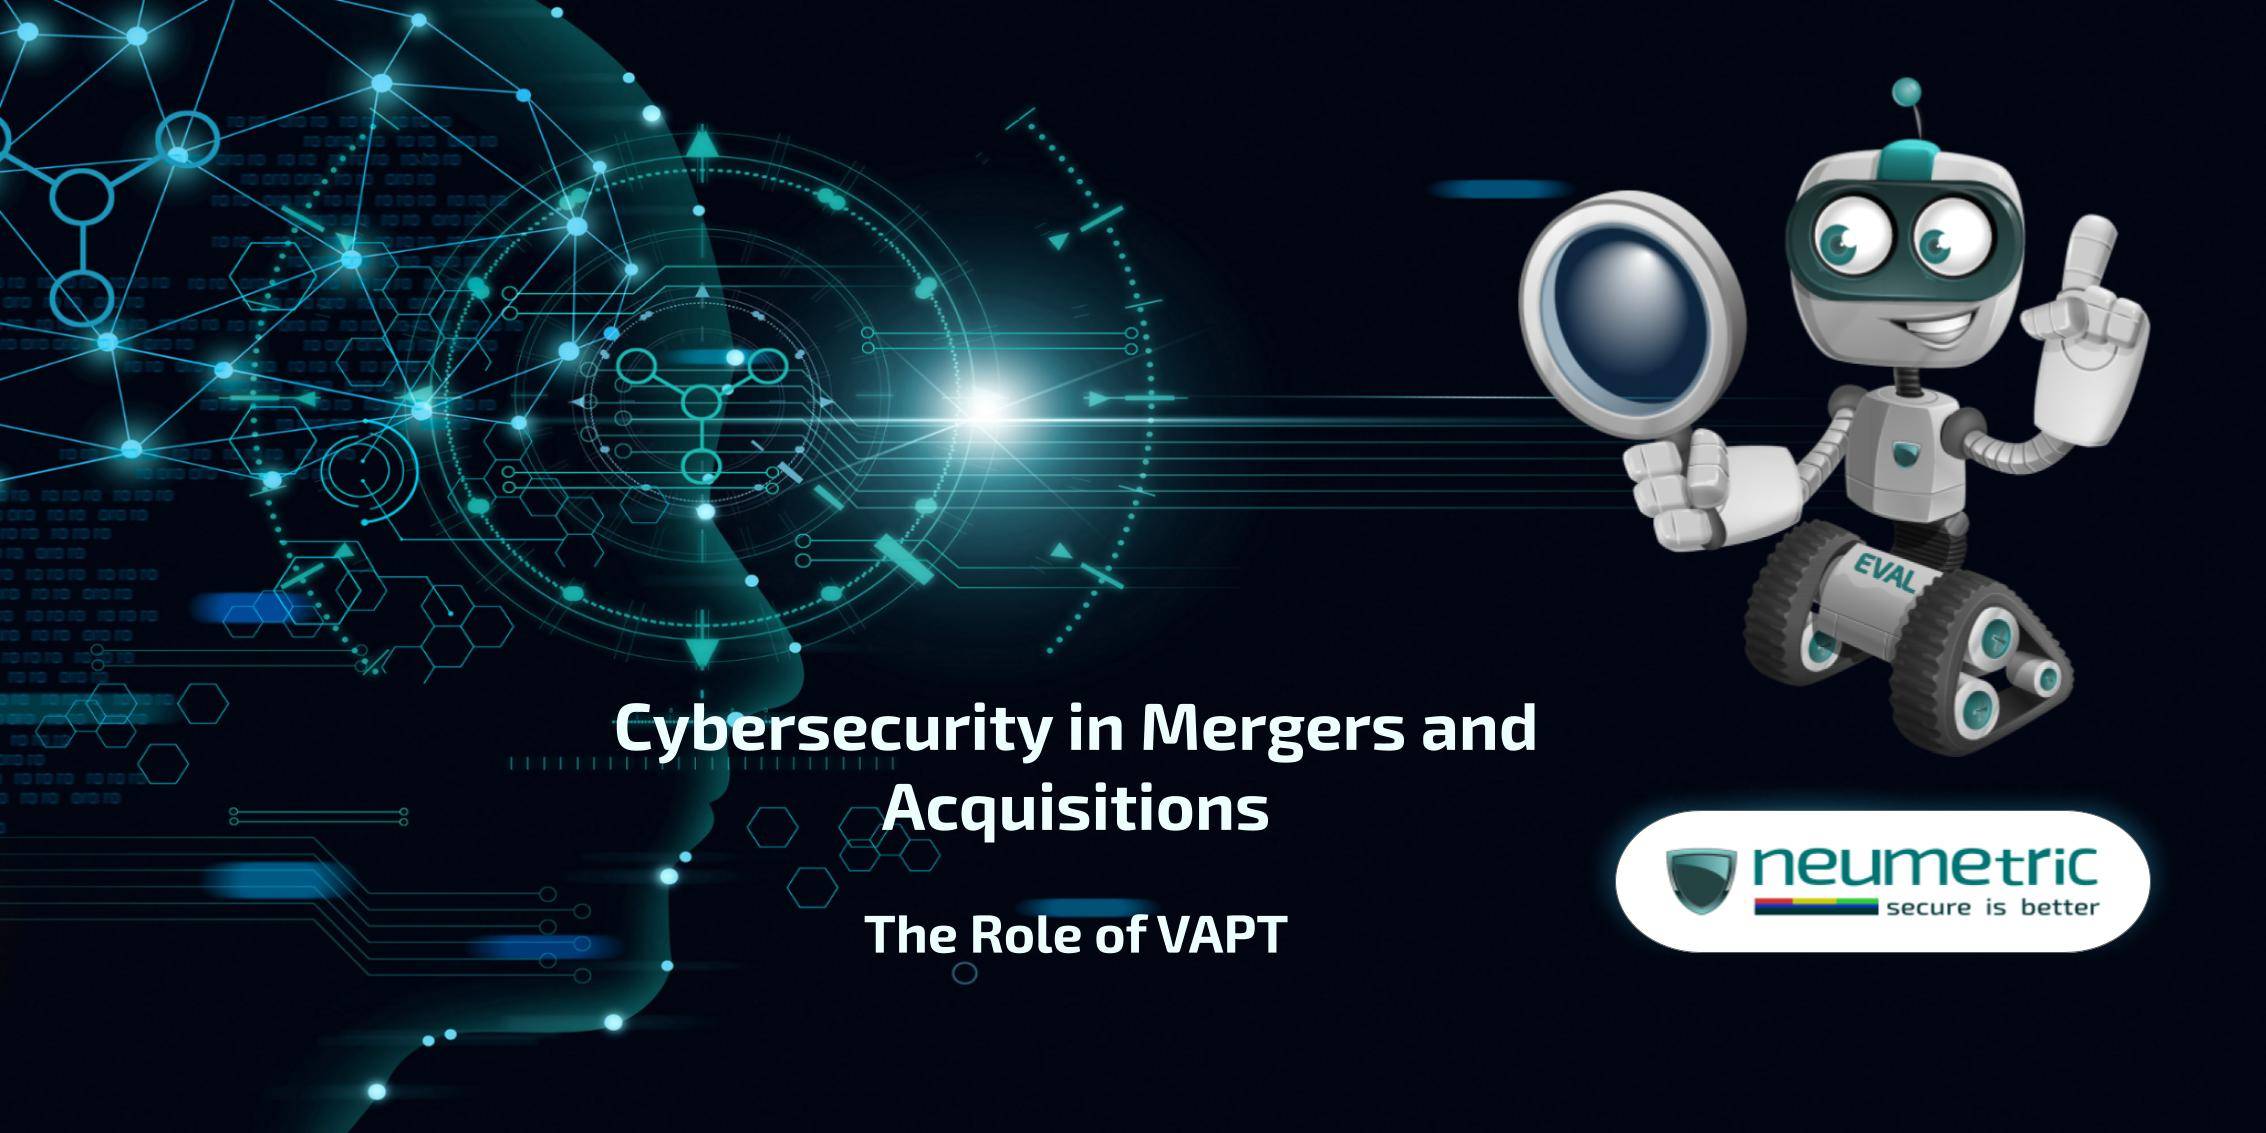 Cybersecurity in mergers & acquisitions: The role of VAPT